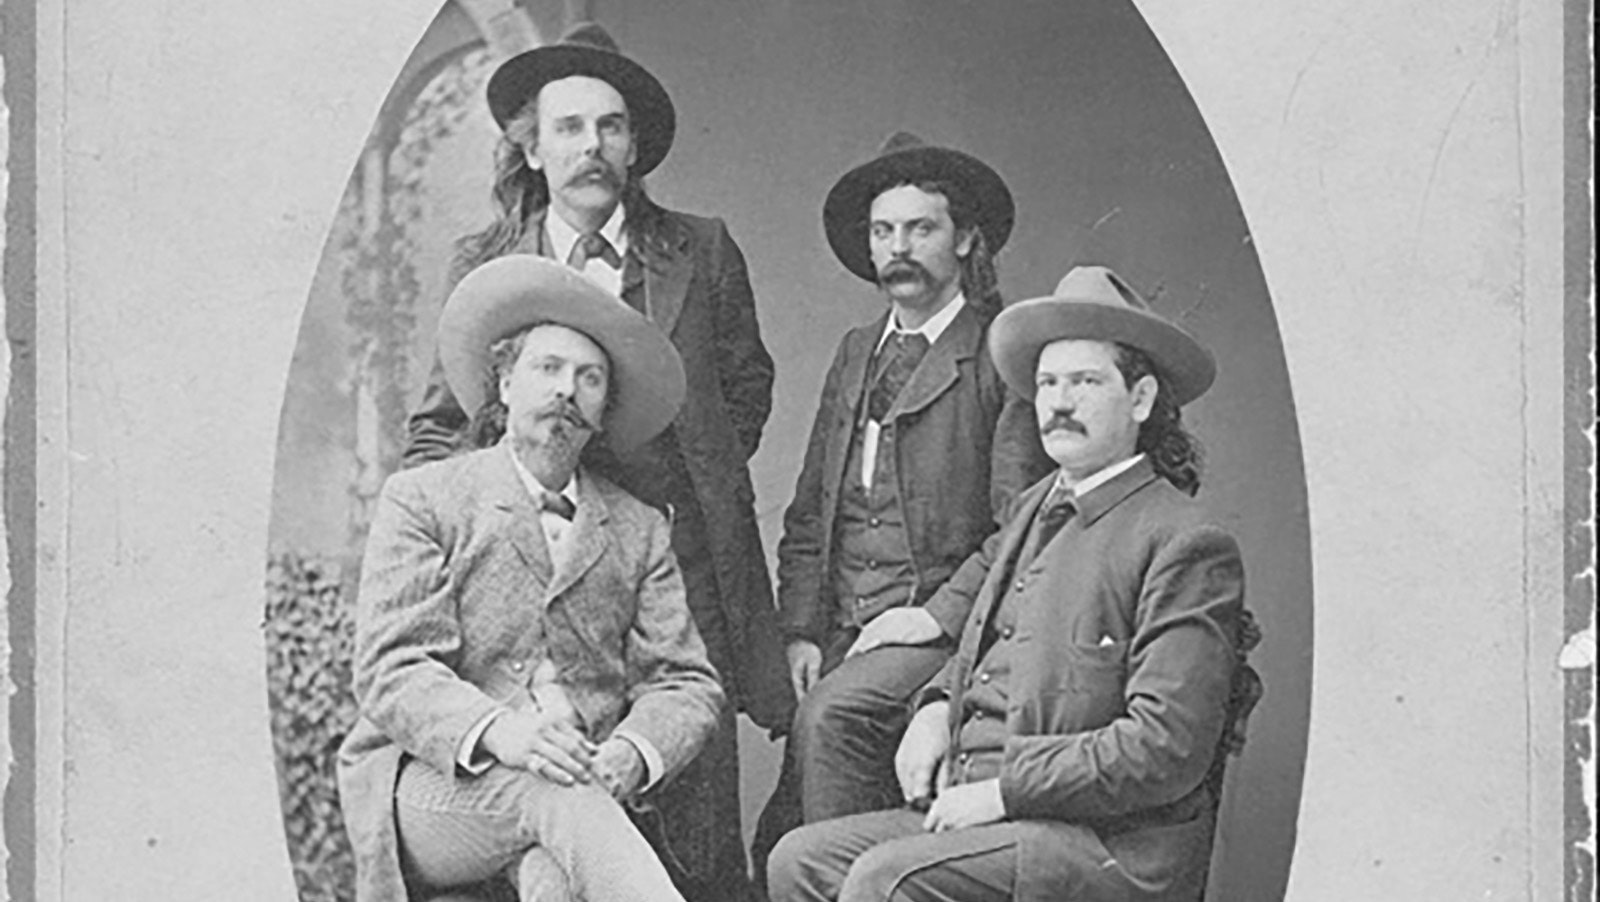 This portrait shows Buffalo Bill Cody, second from right, and Col. Frank Powell, far right, with George Powell and Will Powell.